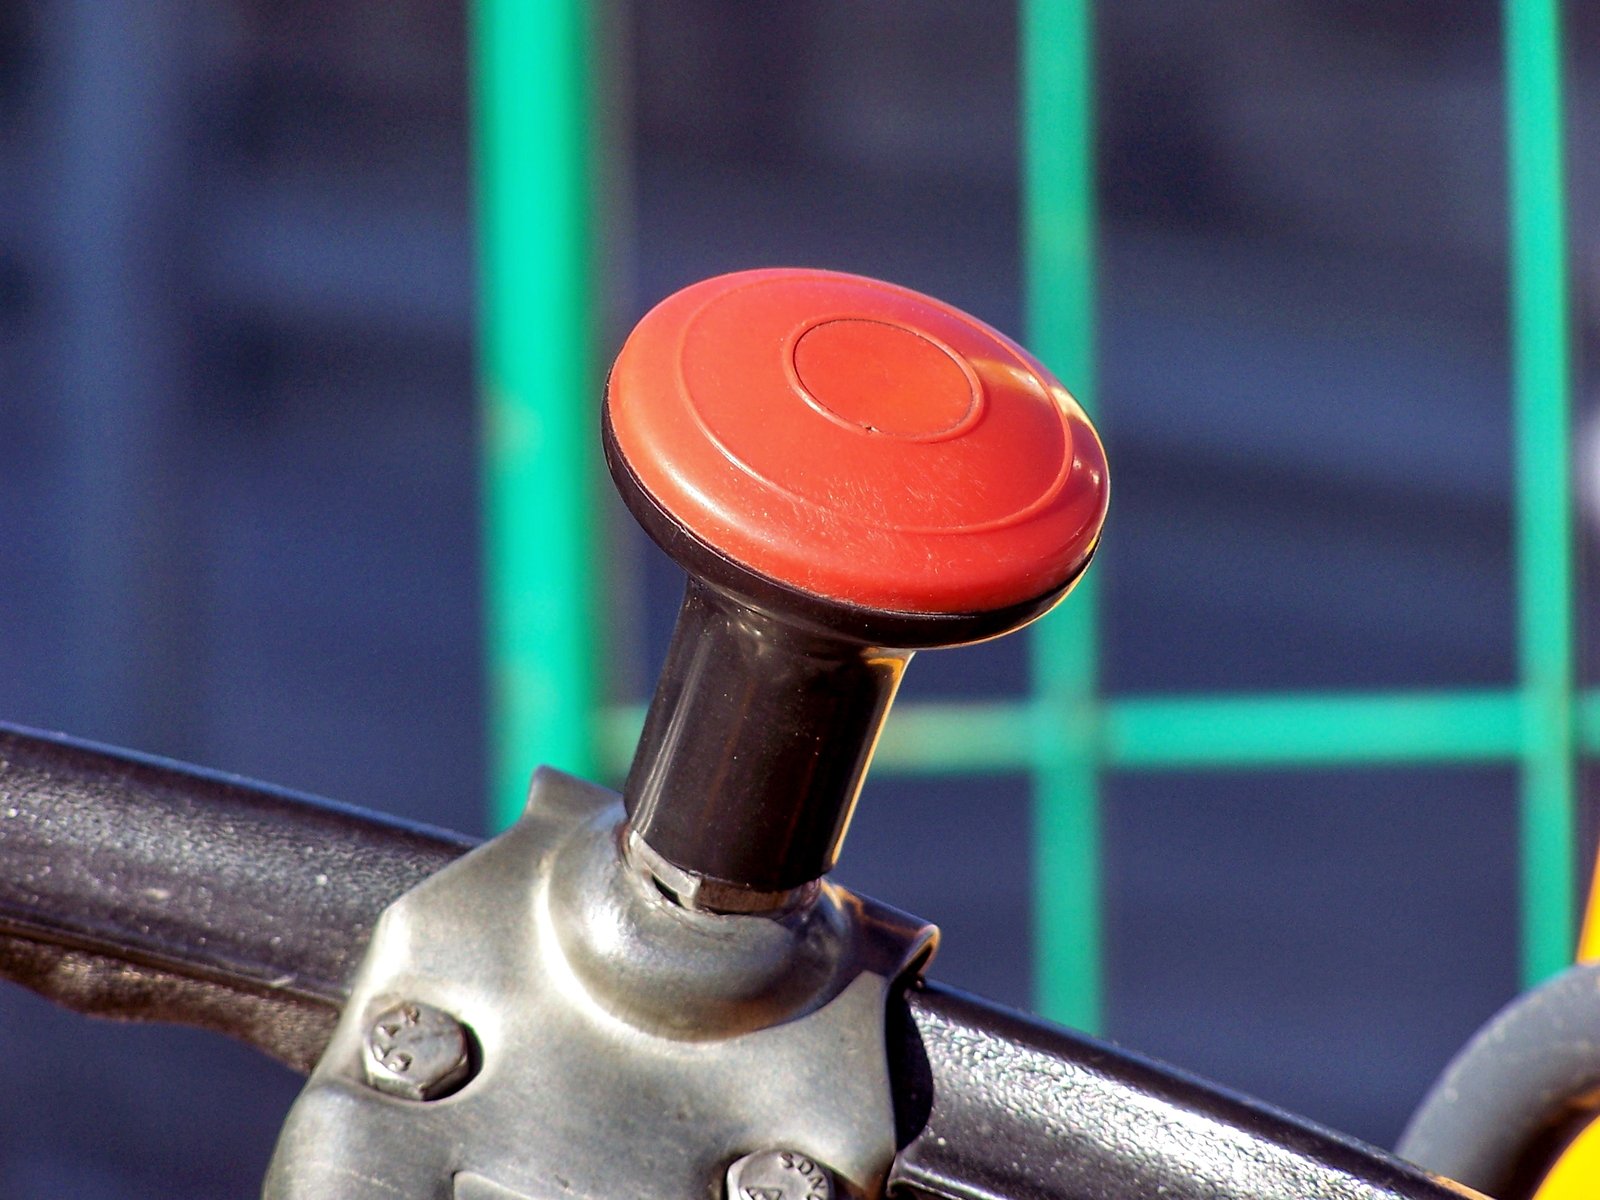 a yellow motorcycle parked behind a metal bar with red on